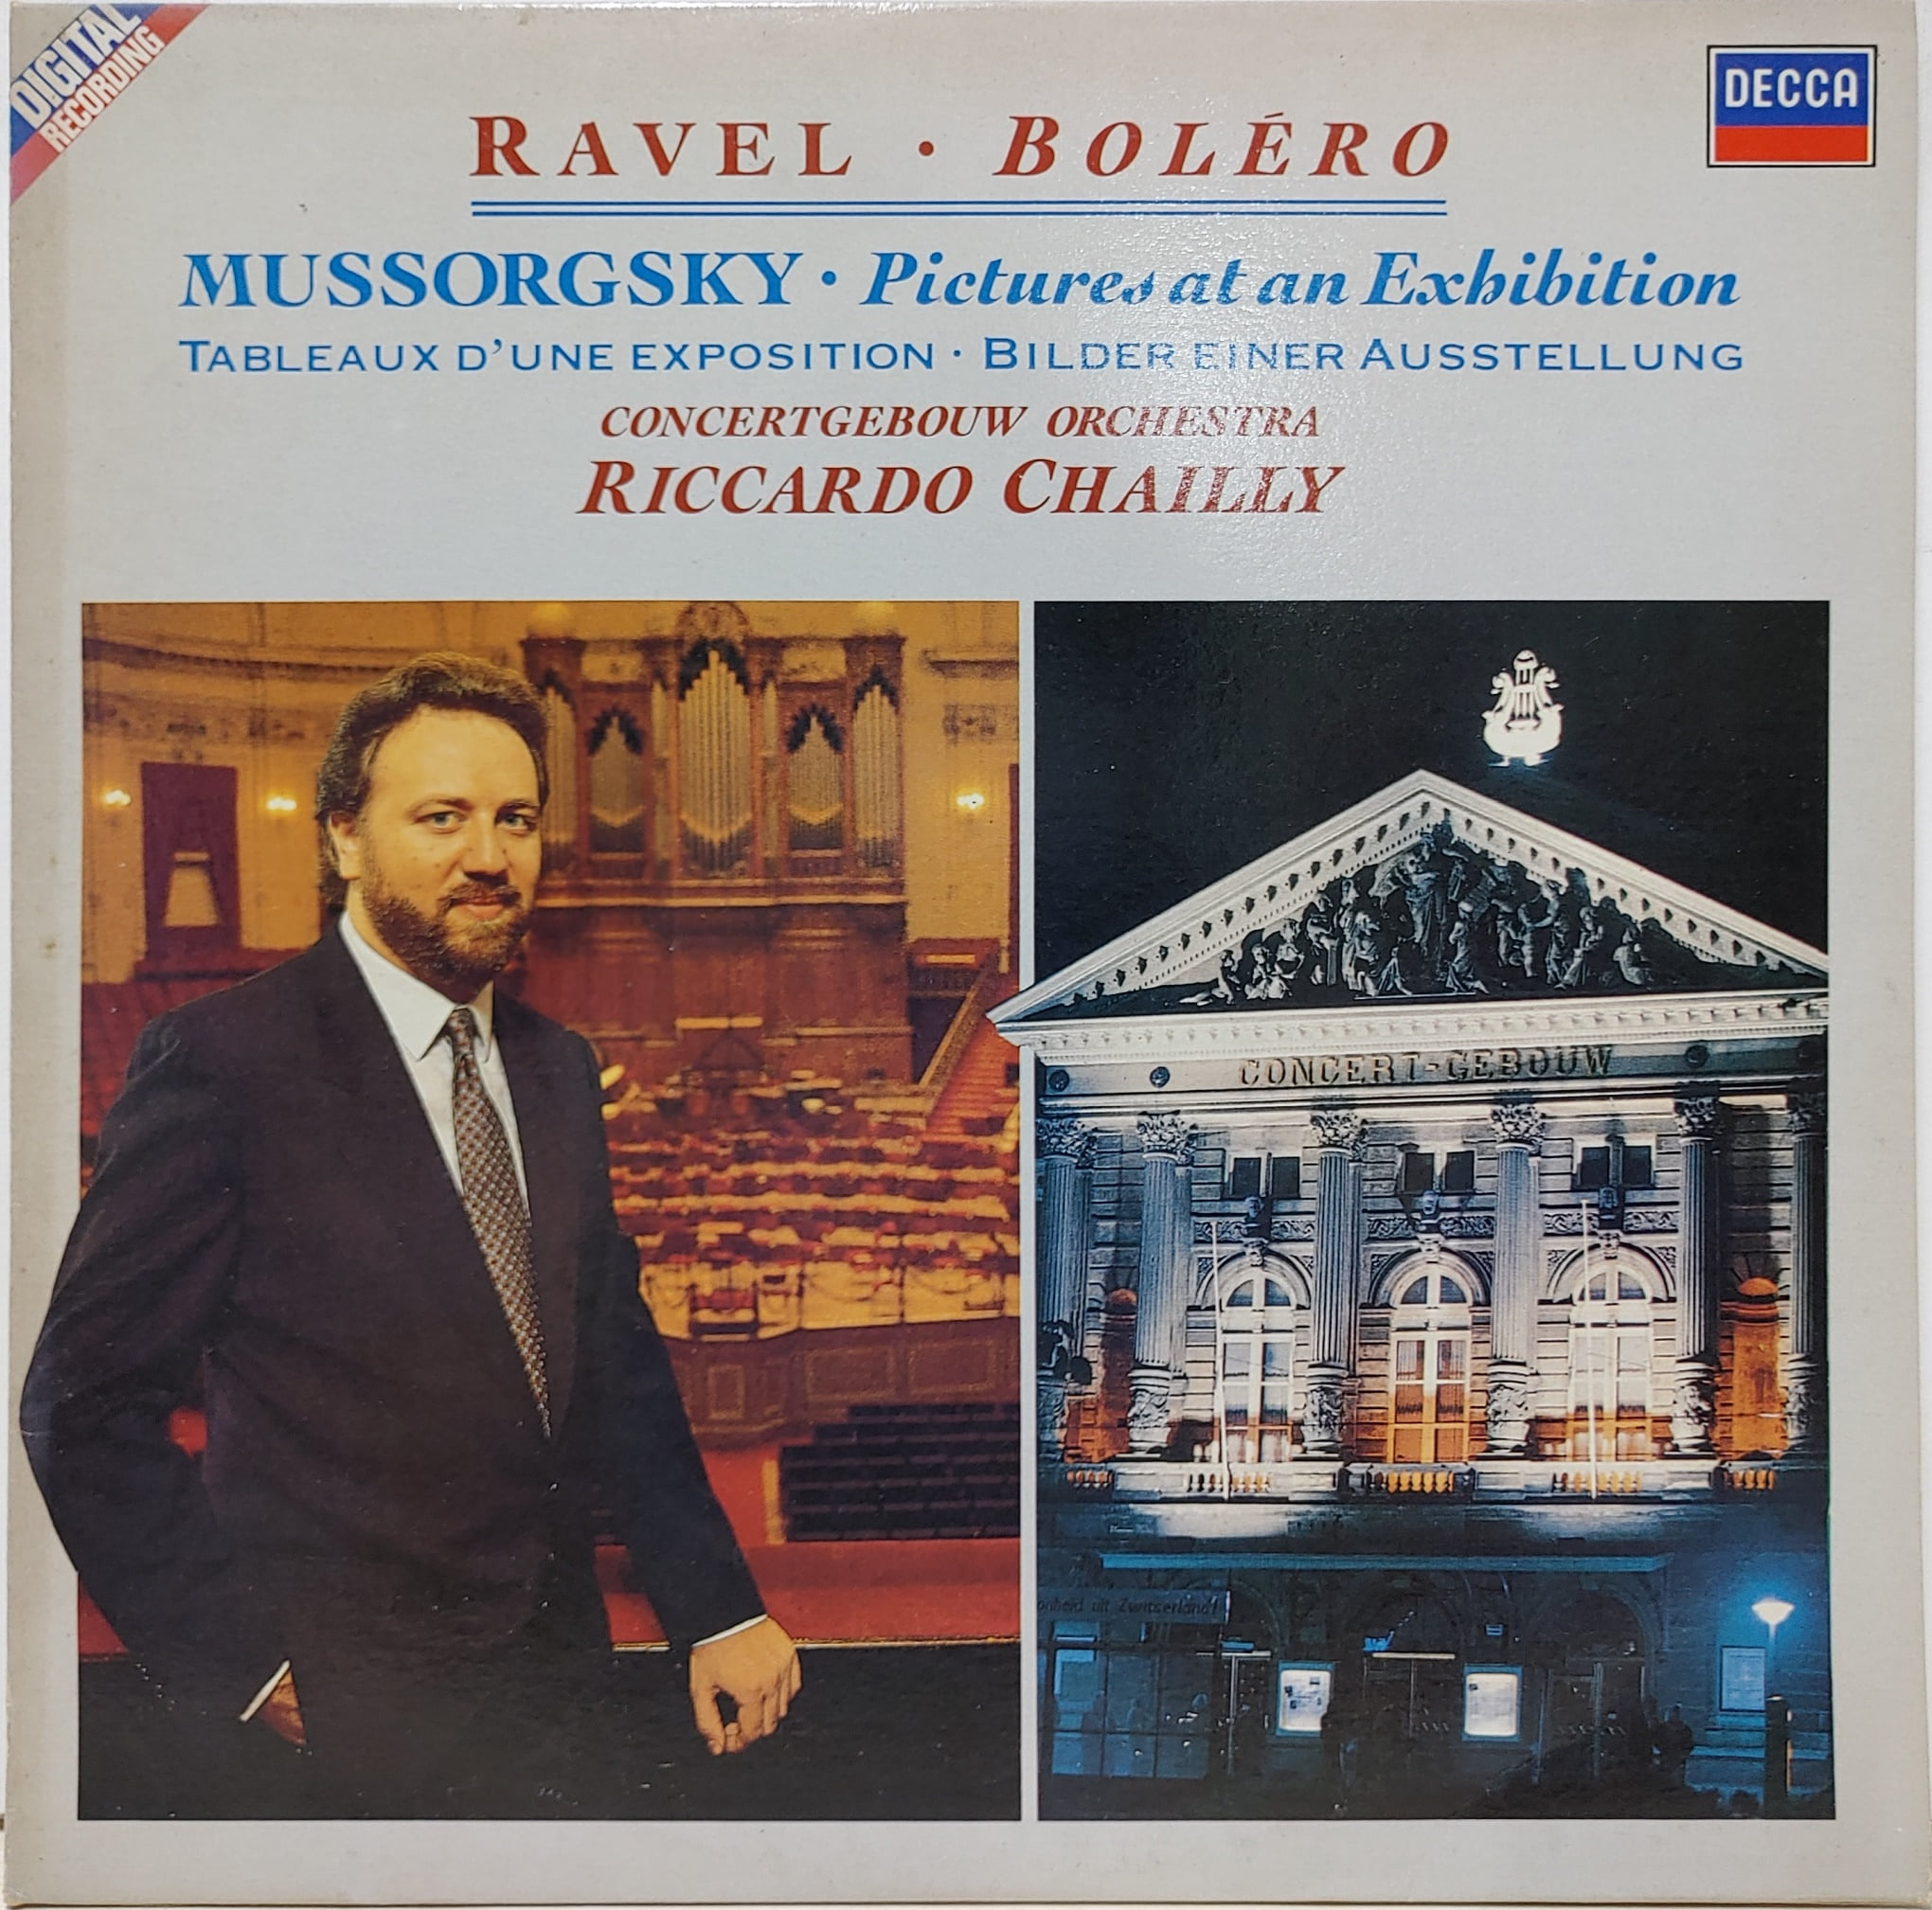 Ravel : Bolero / Mussorgsky : Pictures At An Exhibition / Riccardo Chailly